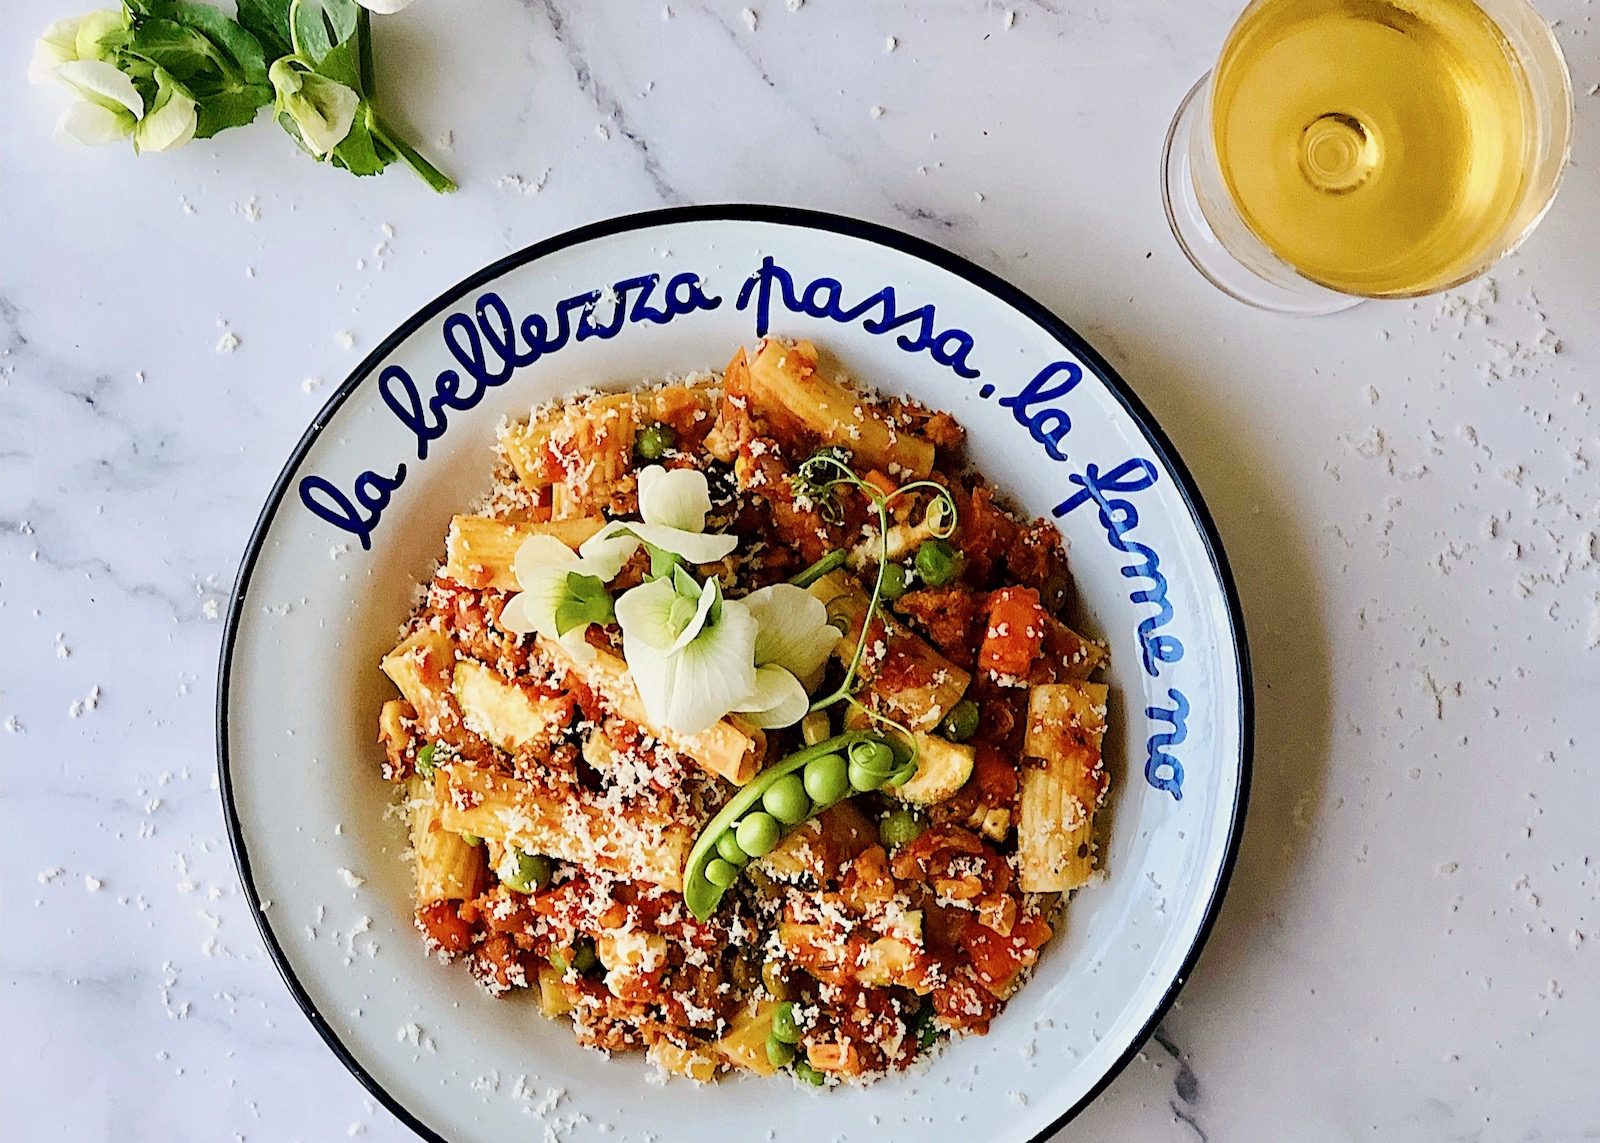 There is a bowl of rigatoni pasta with a tomato vegetable sauce, topped with parmesan shavings and pea tendrils. The bowl is white with a blue handpainted phrase that reads, "la bellezza passa, la fame no," which is Italian for, "beauty fade, hunger doesn't." In the top right corner we see a glass of golden white wine.